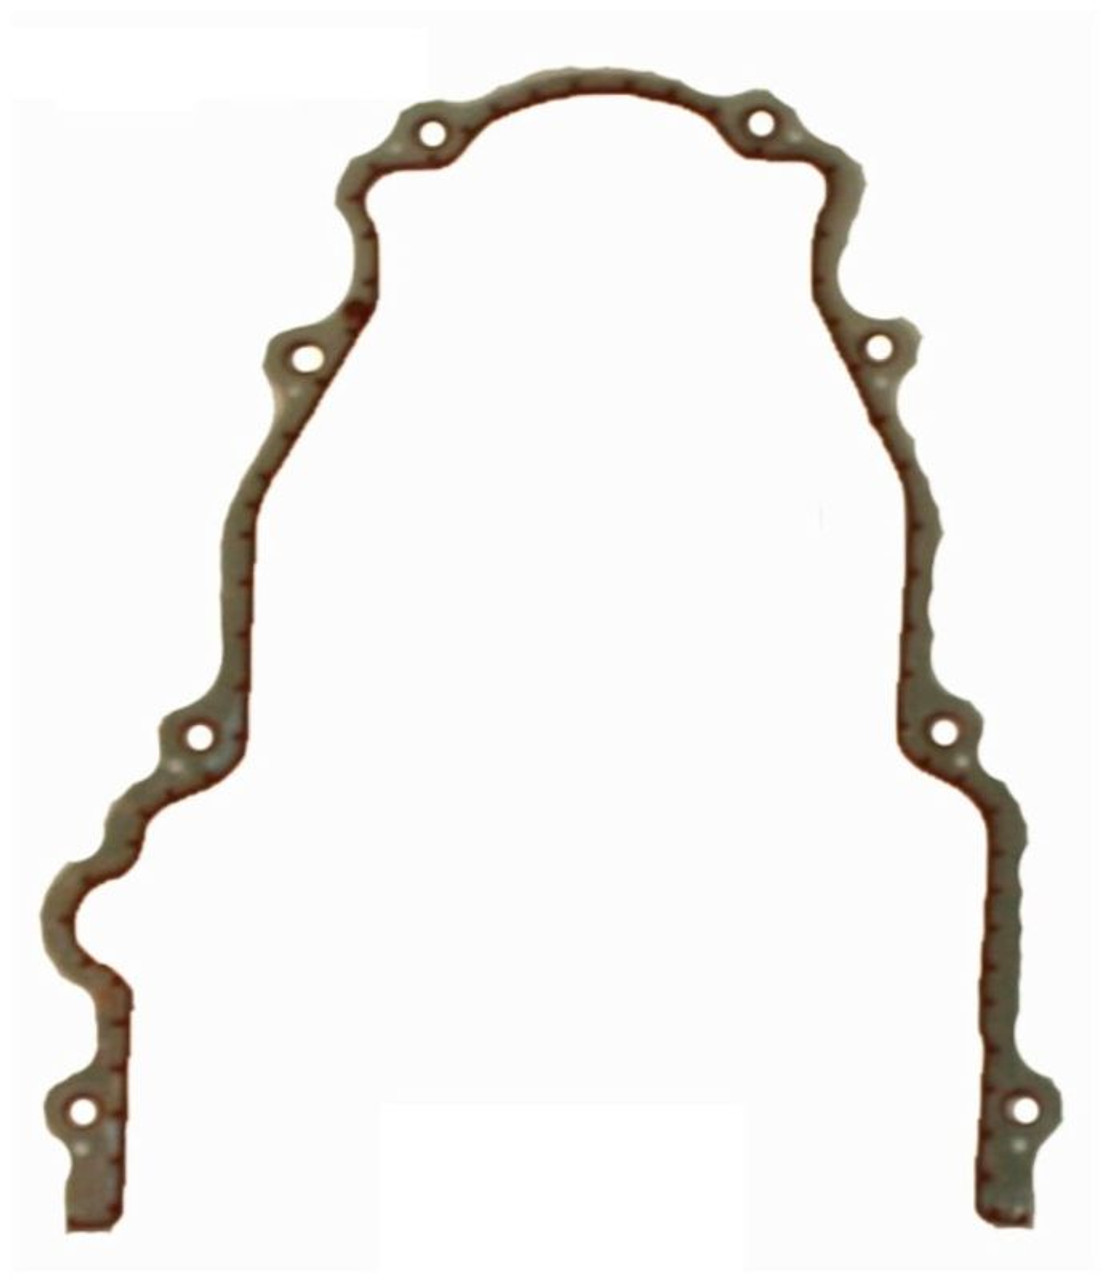 2004 Cadillac CTS 5.7L Engine Timing Cover Gasket TCG293-A -175